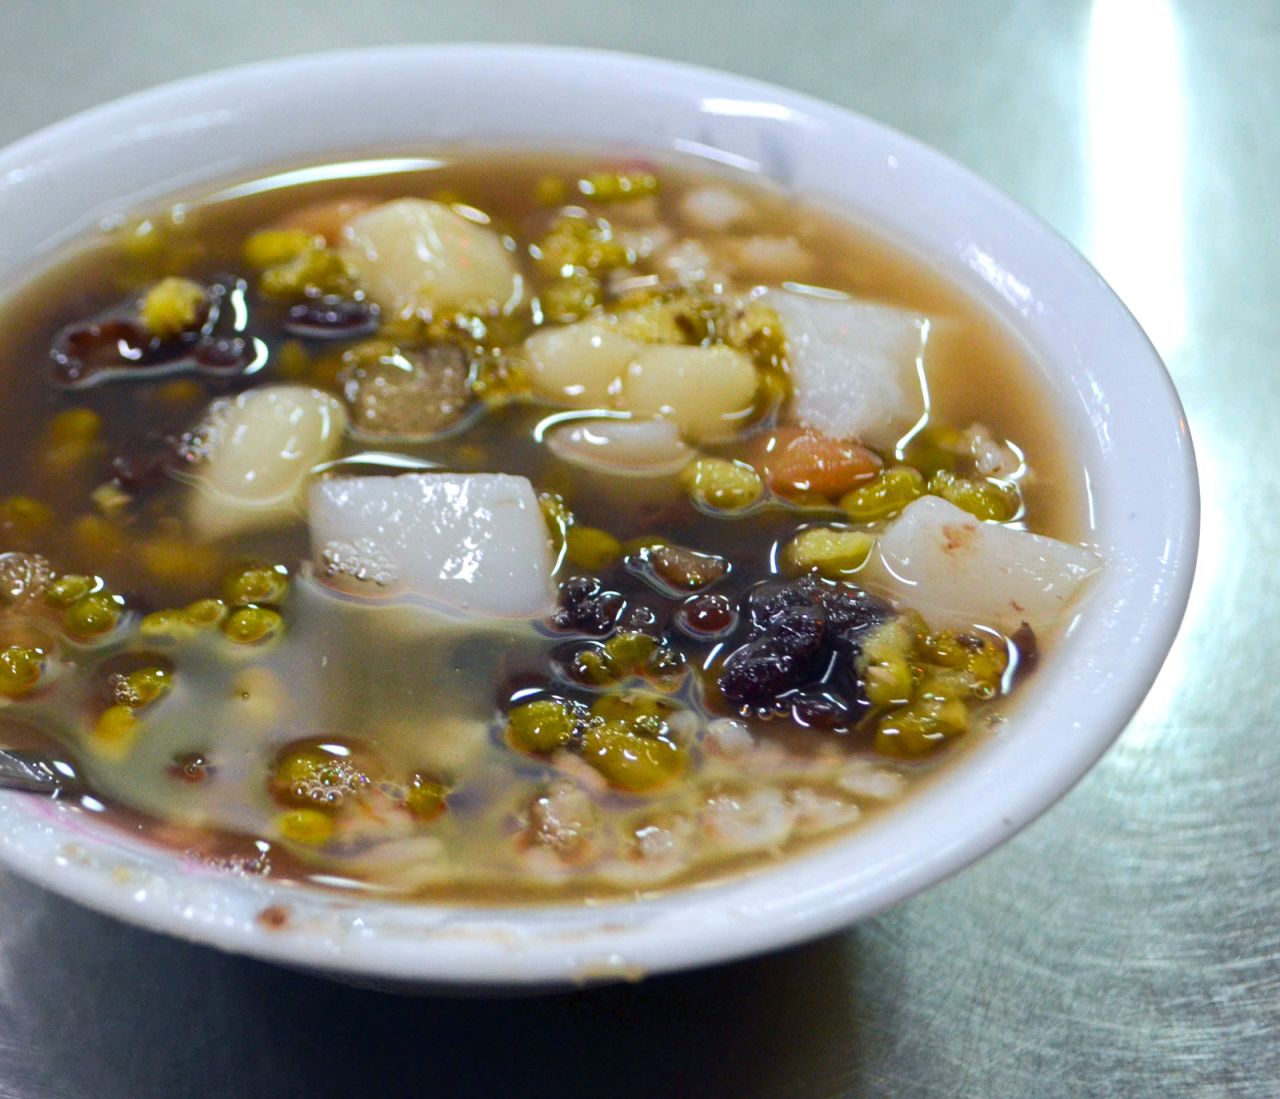 This dish is a trove for the eight "treasures," ingredients that include glutinous rice balls, peanuts and green and red beans. It's traditionally served with shaved ice in summer and soup in winter.